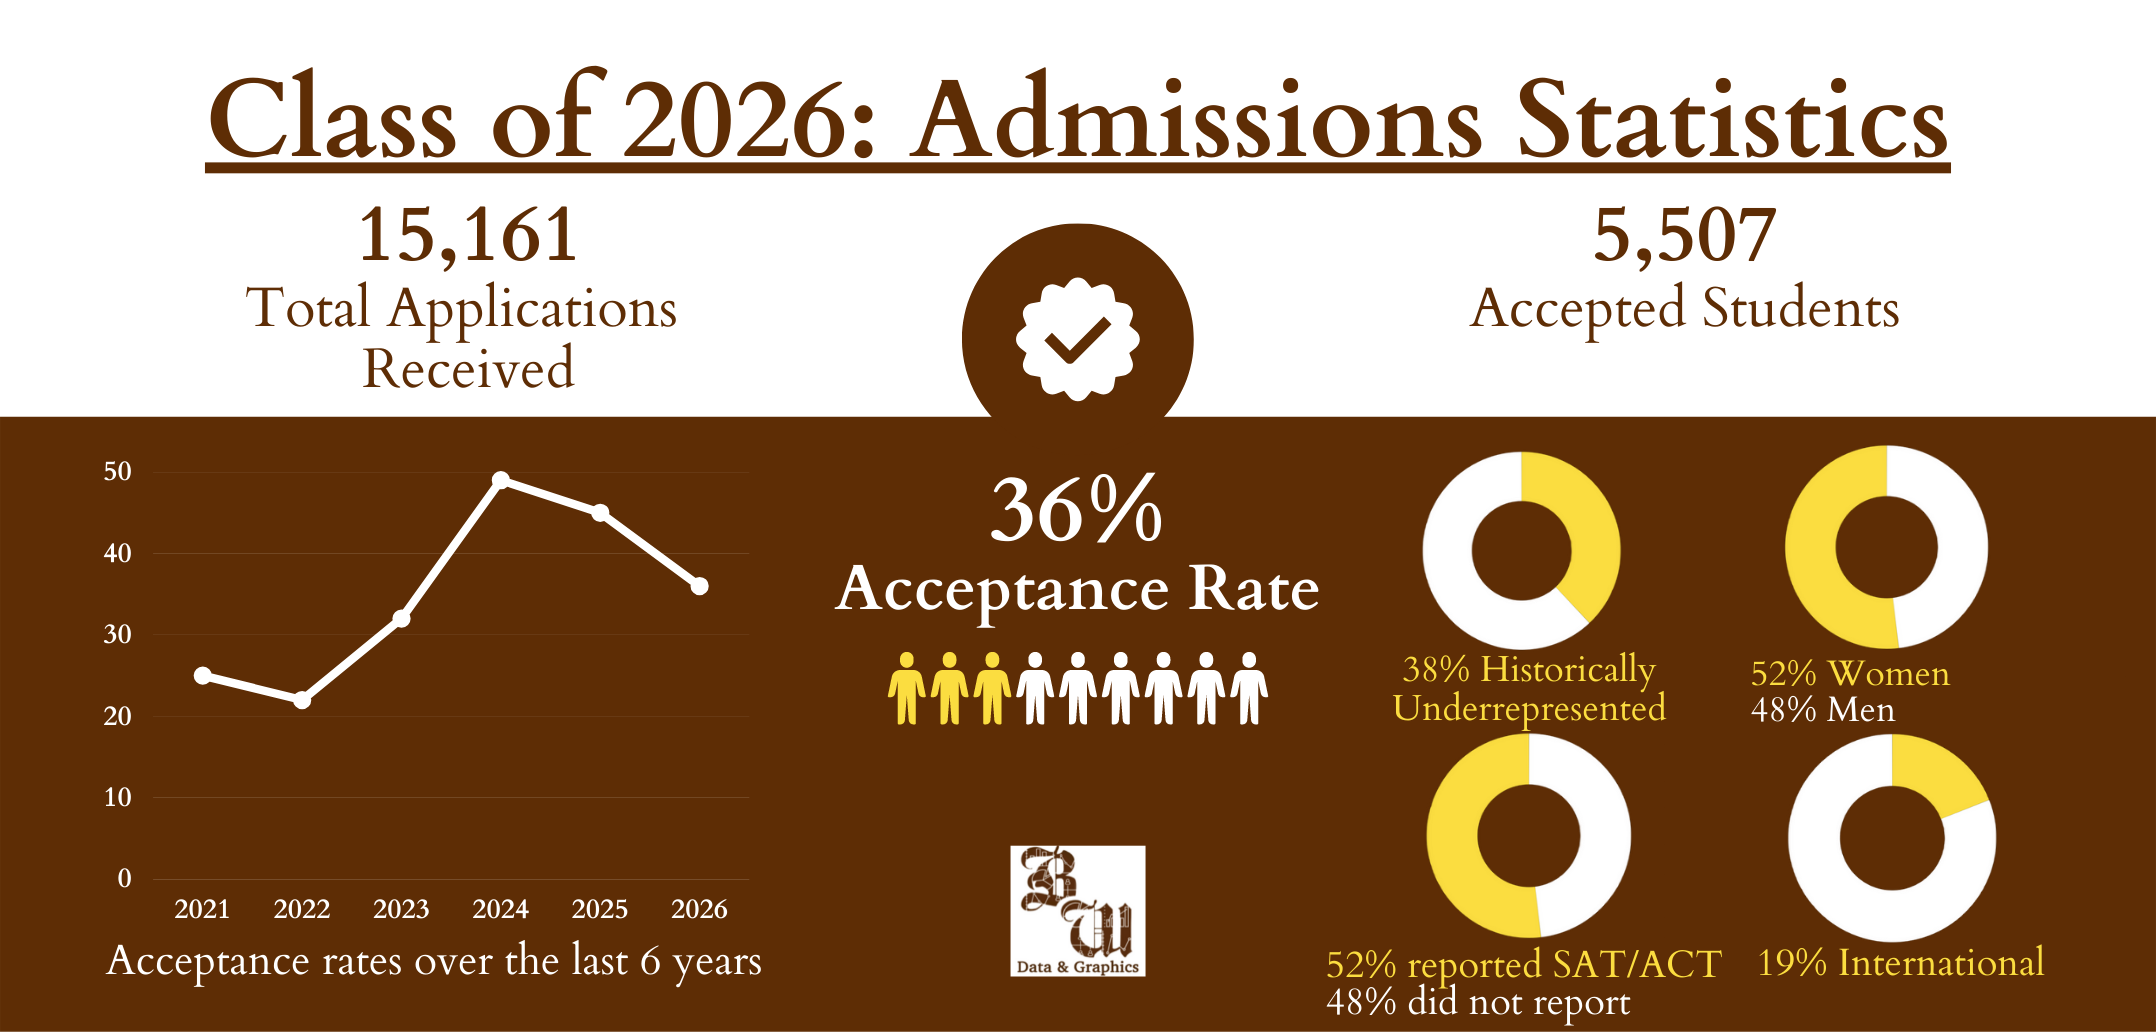 Acceptance rate decreases for class of 2026 The Brown and White